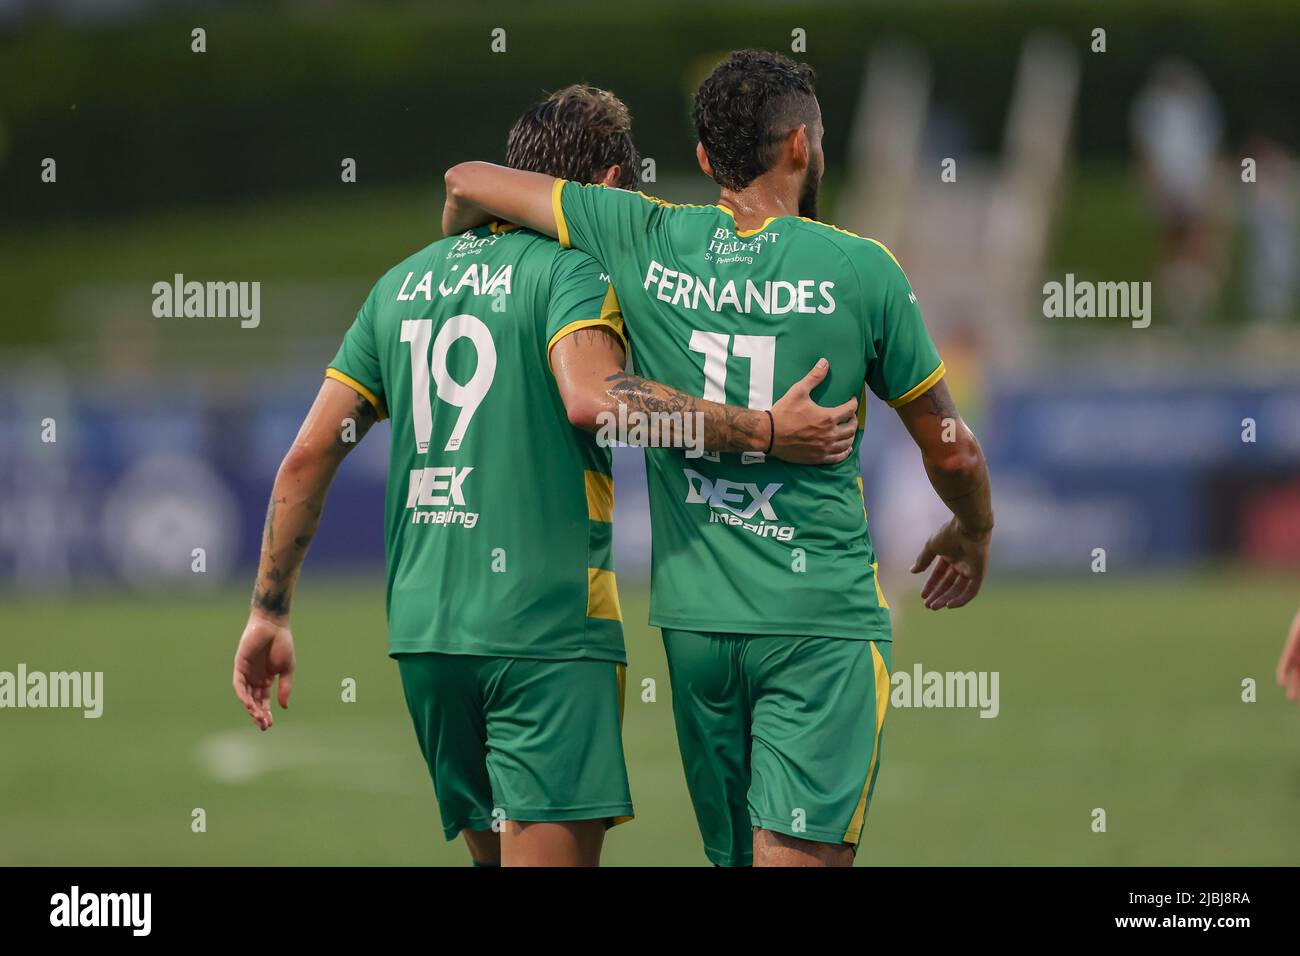 St. Petersburg, FL: Tampa Bay Rowdies forward Jake LaCava (19) puts his arm around  midfielder Leo Fernandes (11) scoring the only goal of the game af Stock Photo